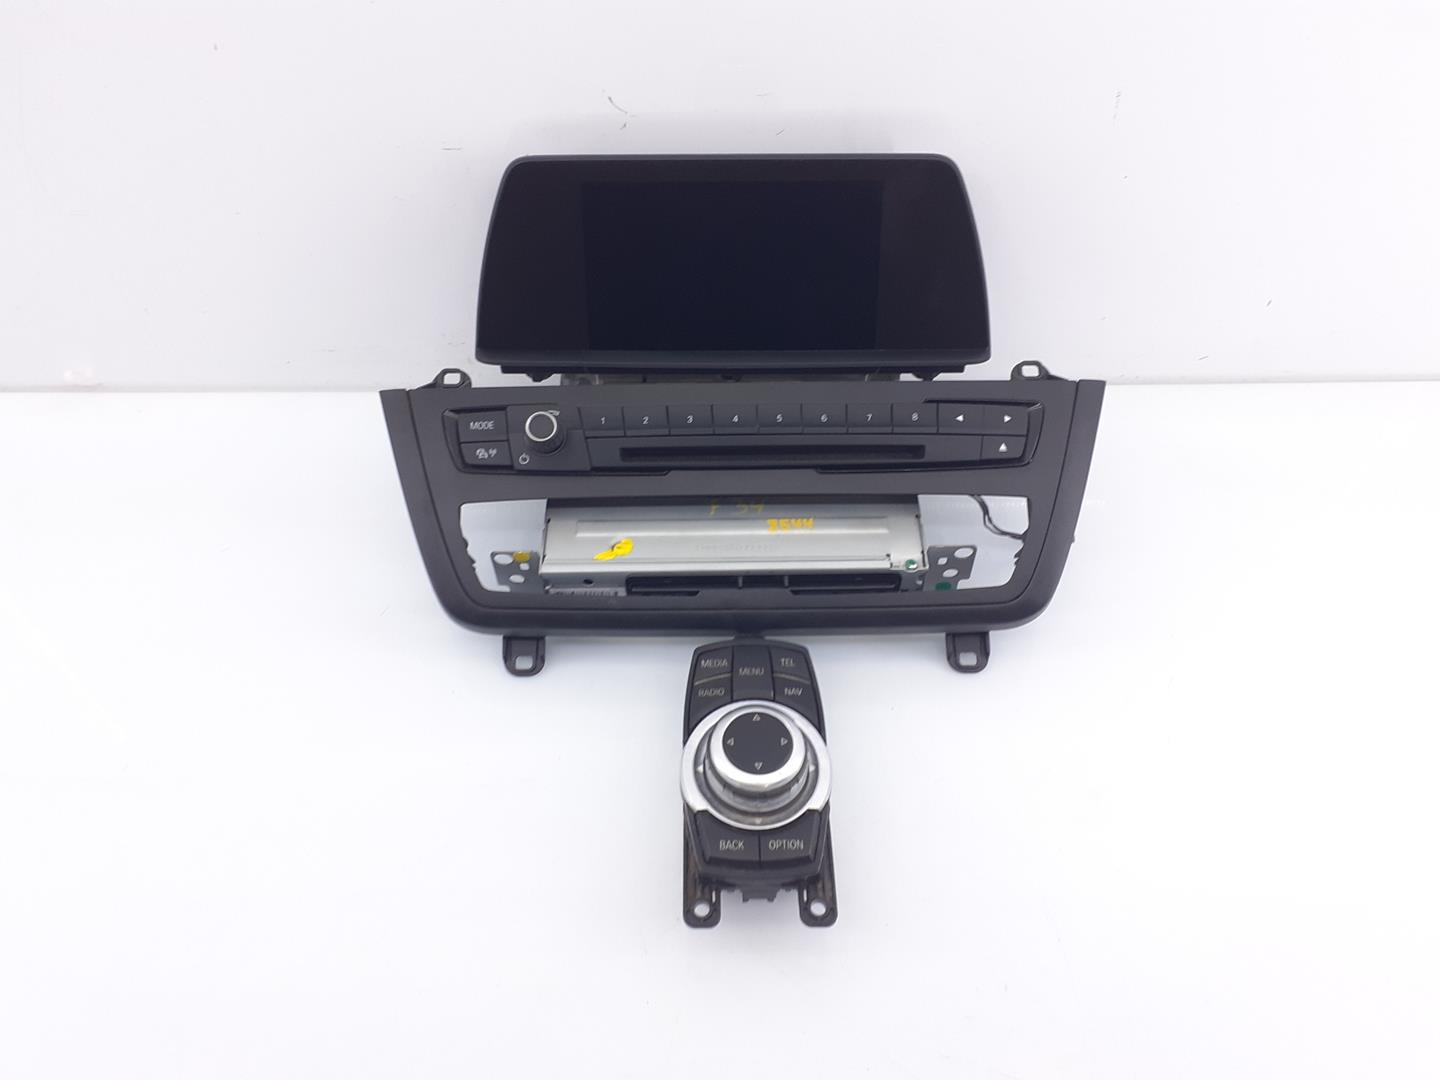 BMW 3 Series Gran Turismo F34 (2013-2017) Music Player With GPS 9381315, 9292247026, E3-A2-27-3 18691722